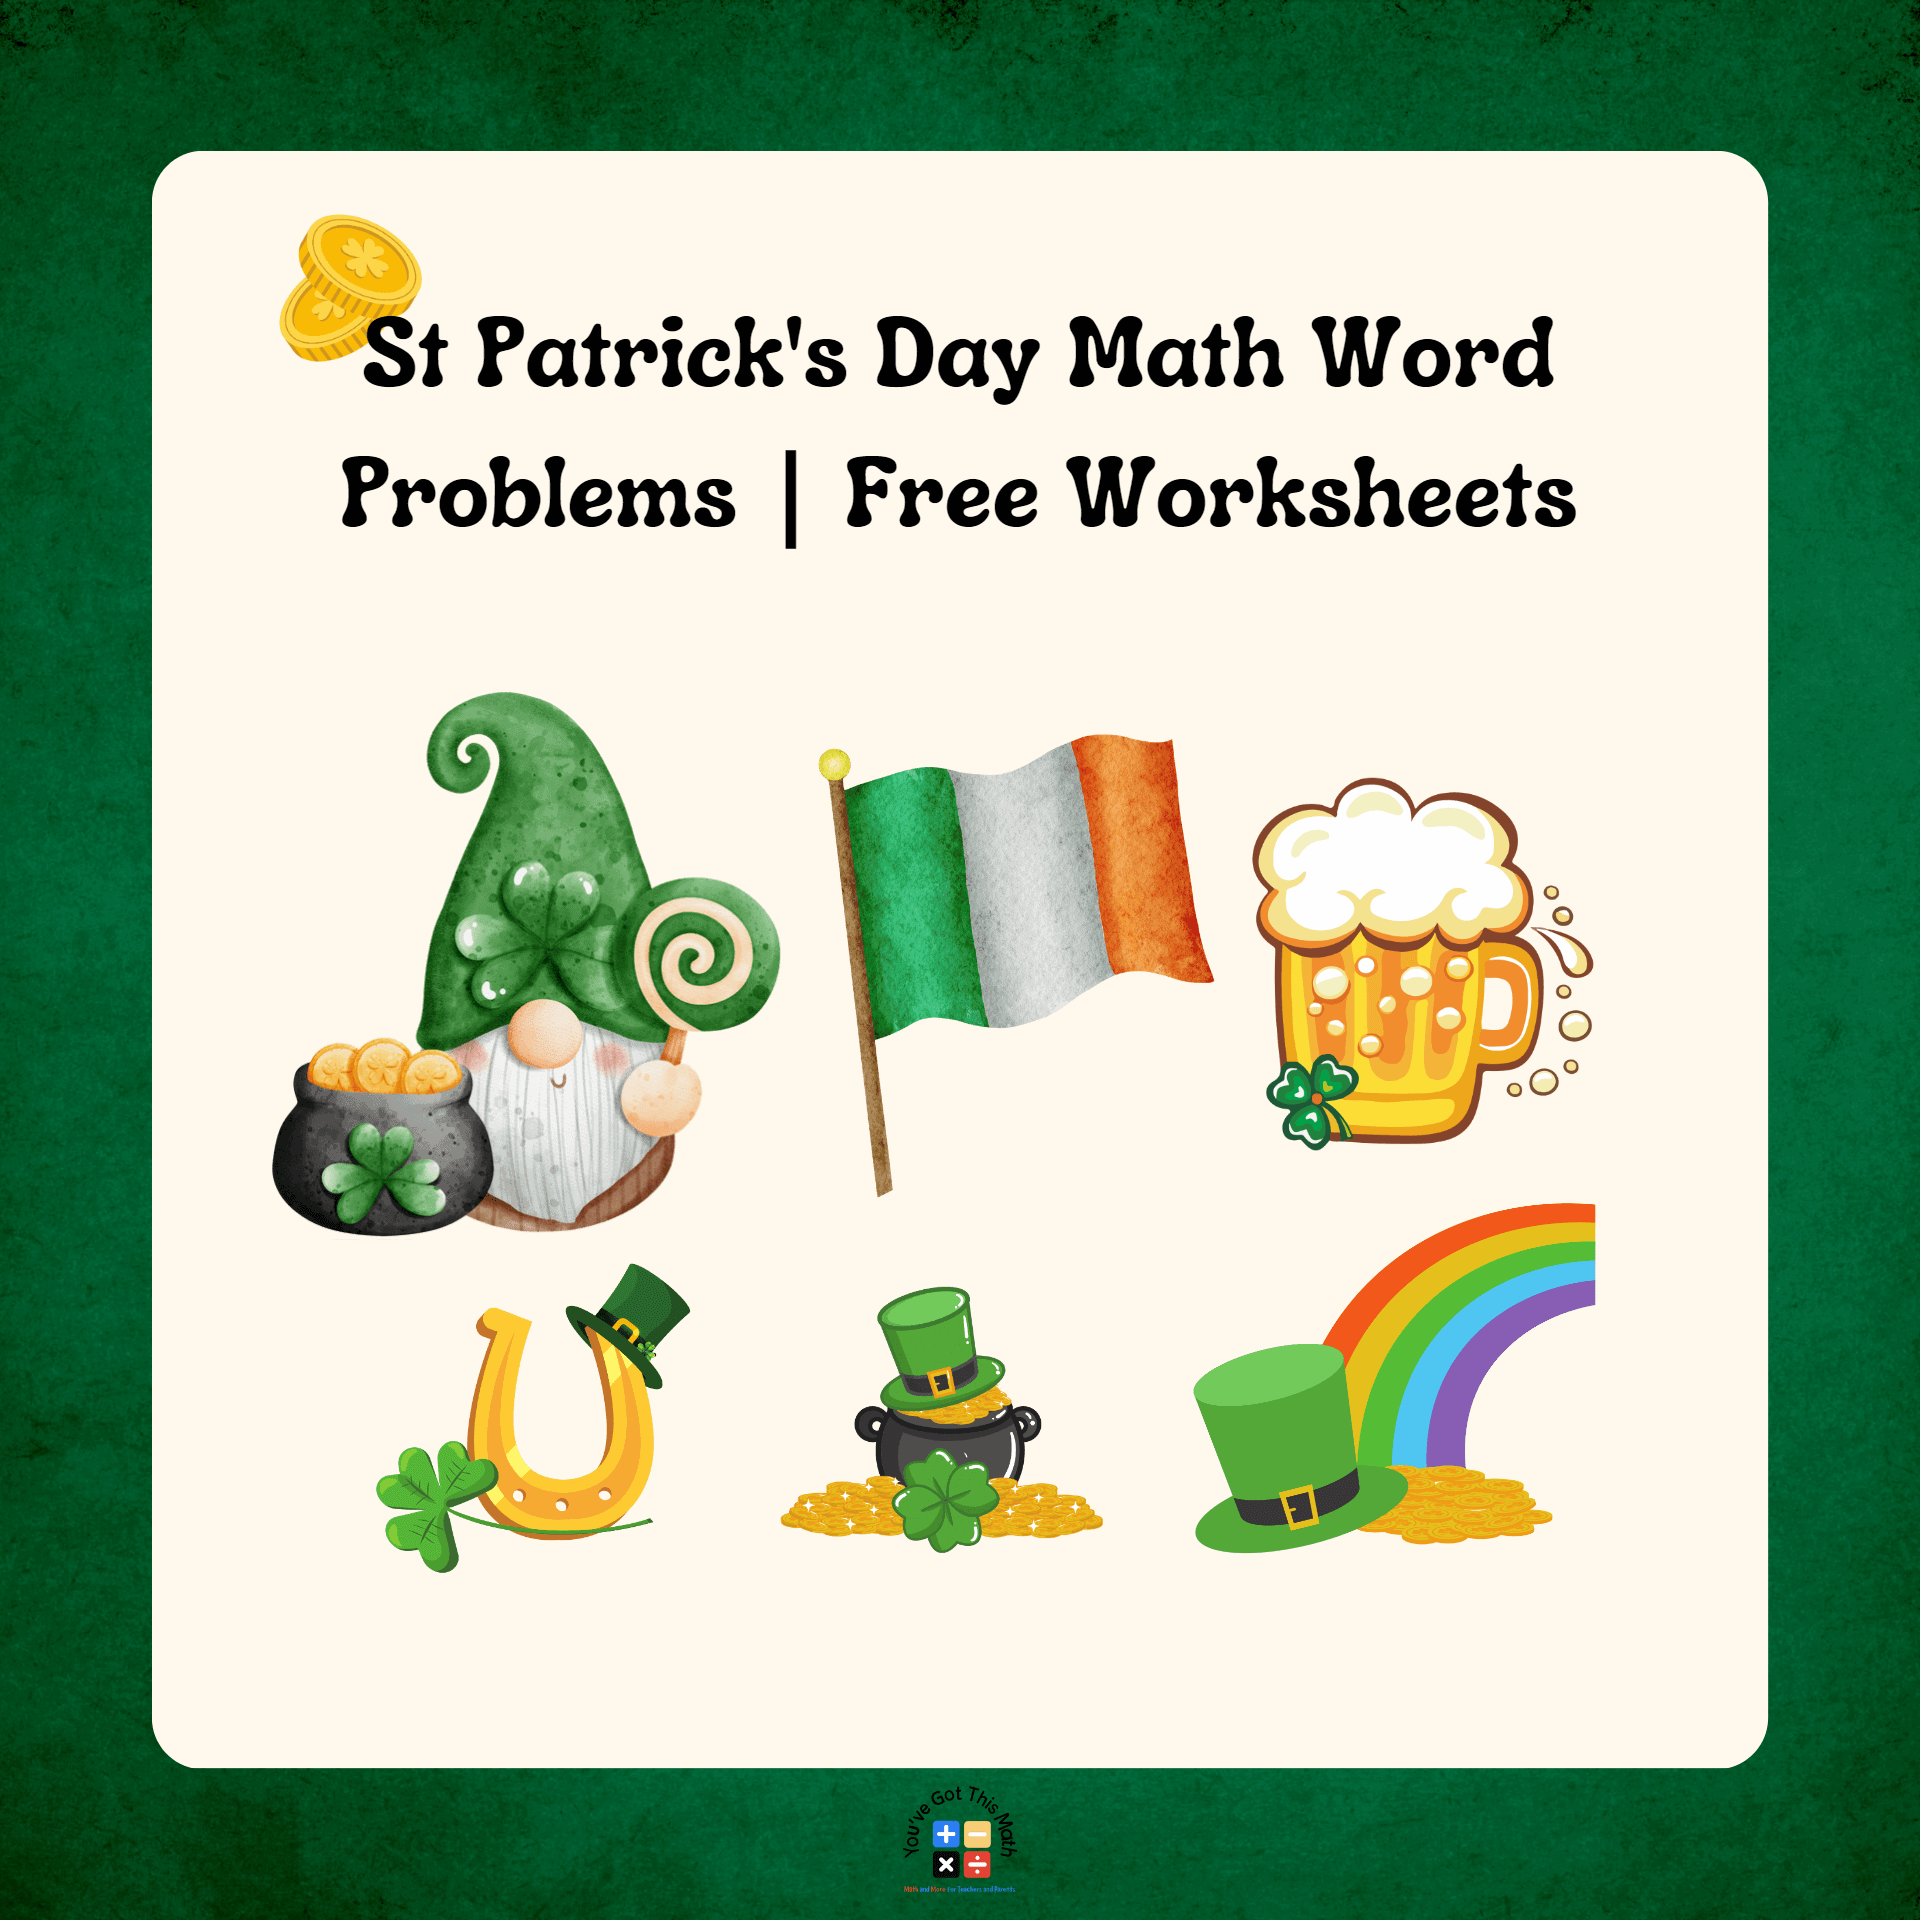 60 St. Patrick’s Day Math Word Problems | Free Worksheets